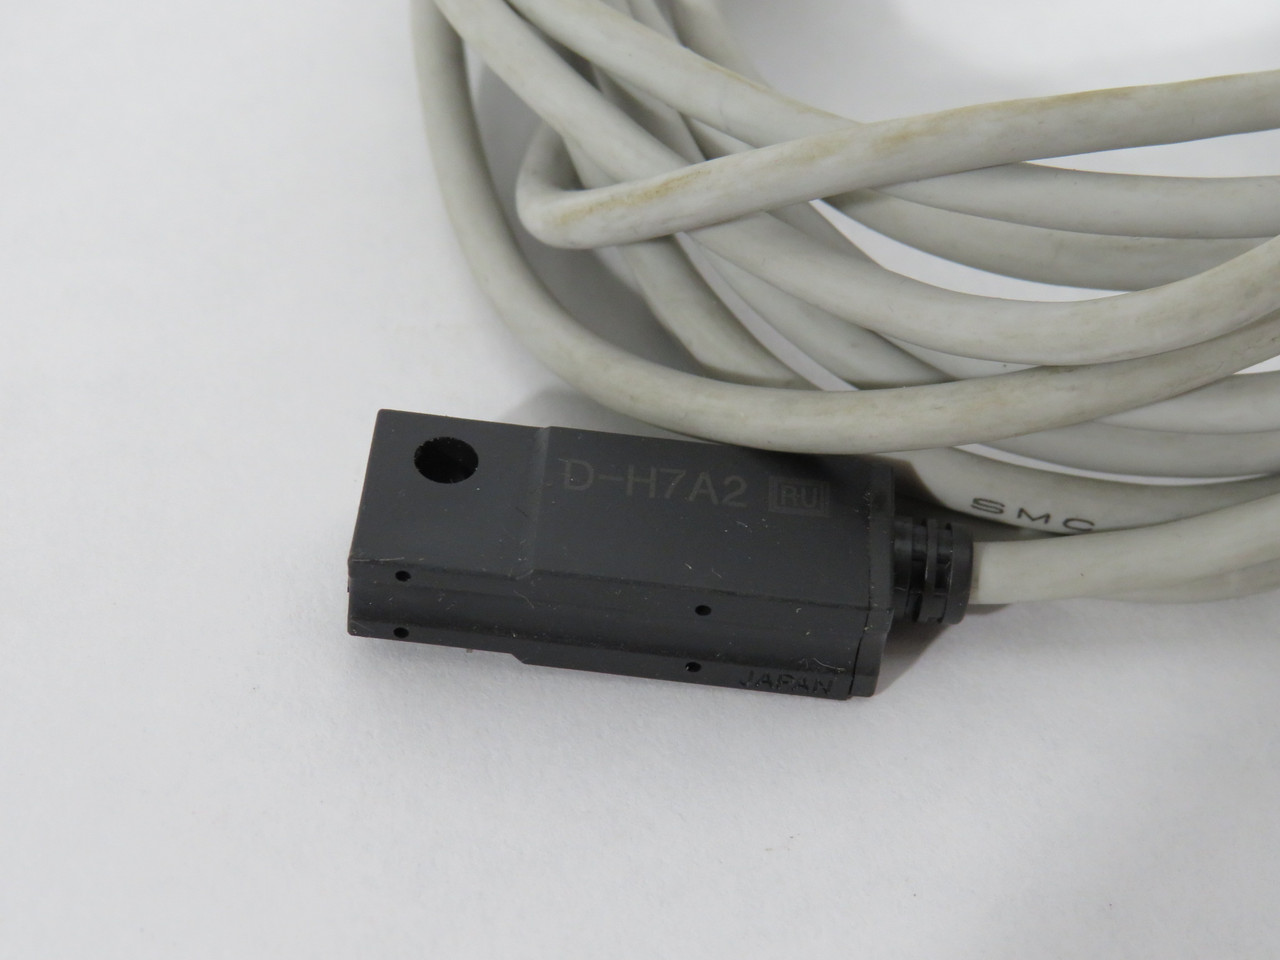 SMC D-H7A2L Solid State Auto Switch 28VDC 80mA 2.2m Cut Cable Cosmetic Wear USED